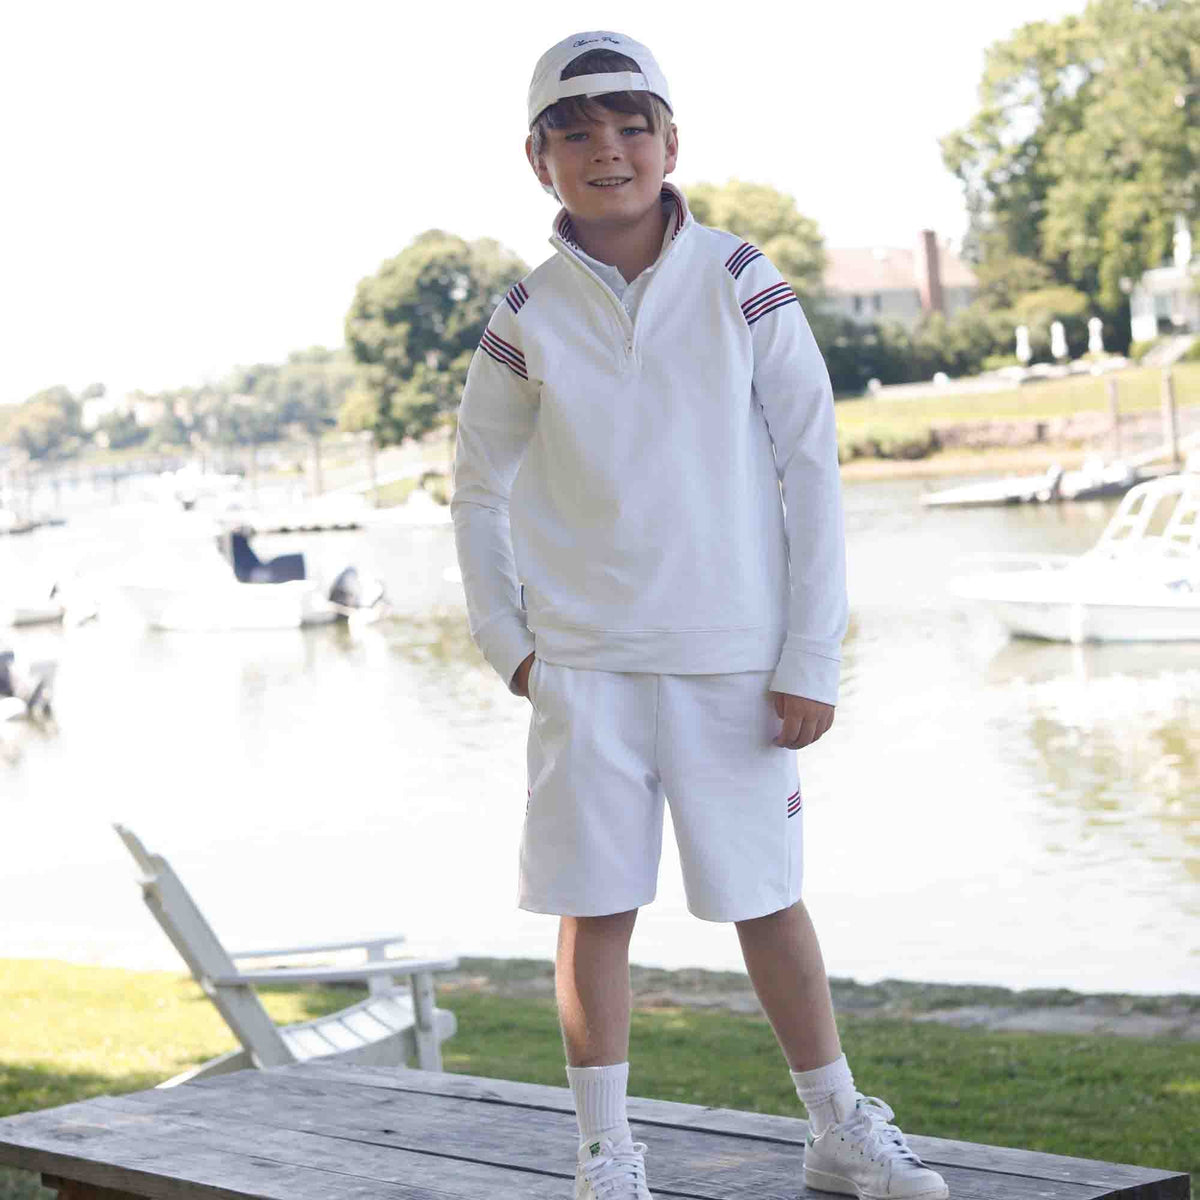 Classic and Preppy Theo Tennis Performance Americana 1/2 Zip, Bright White-Shirts and Tops-CPC - Classic Prep Childrenswear